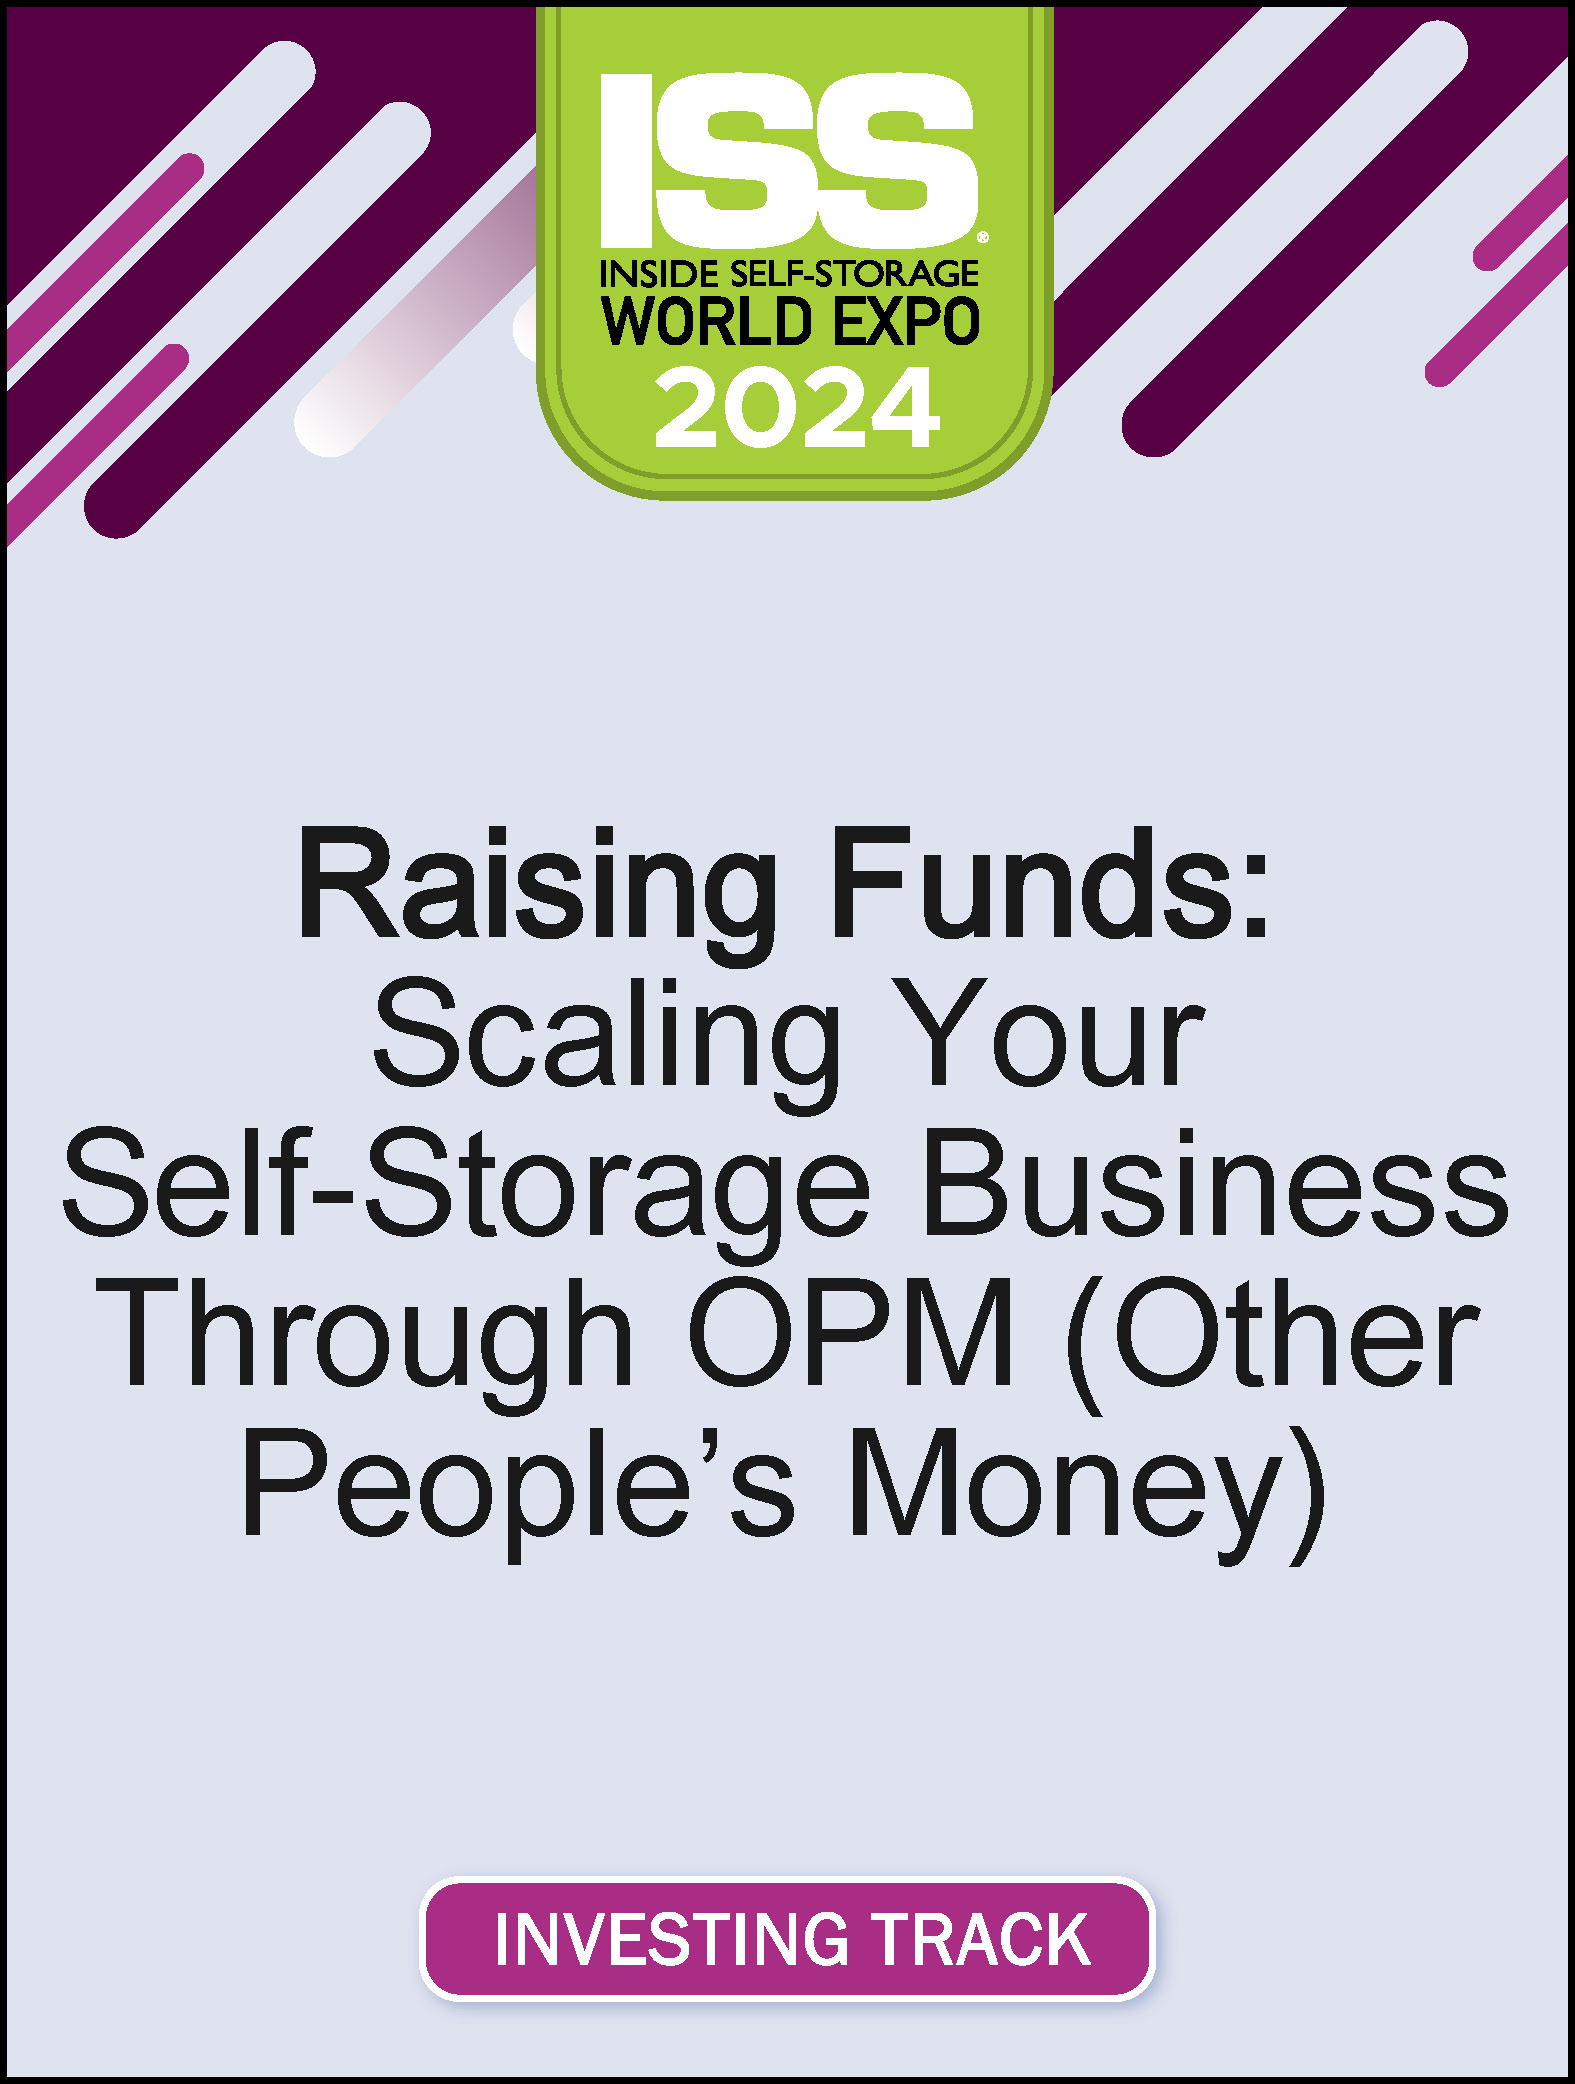 Video Pre-Order Sub - Raising Funds: Scaling Your Self-Storage Business Through OPM (Other People’s Money)